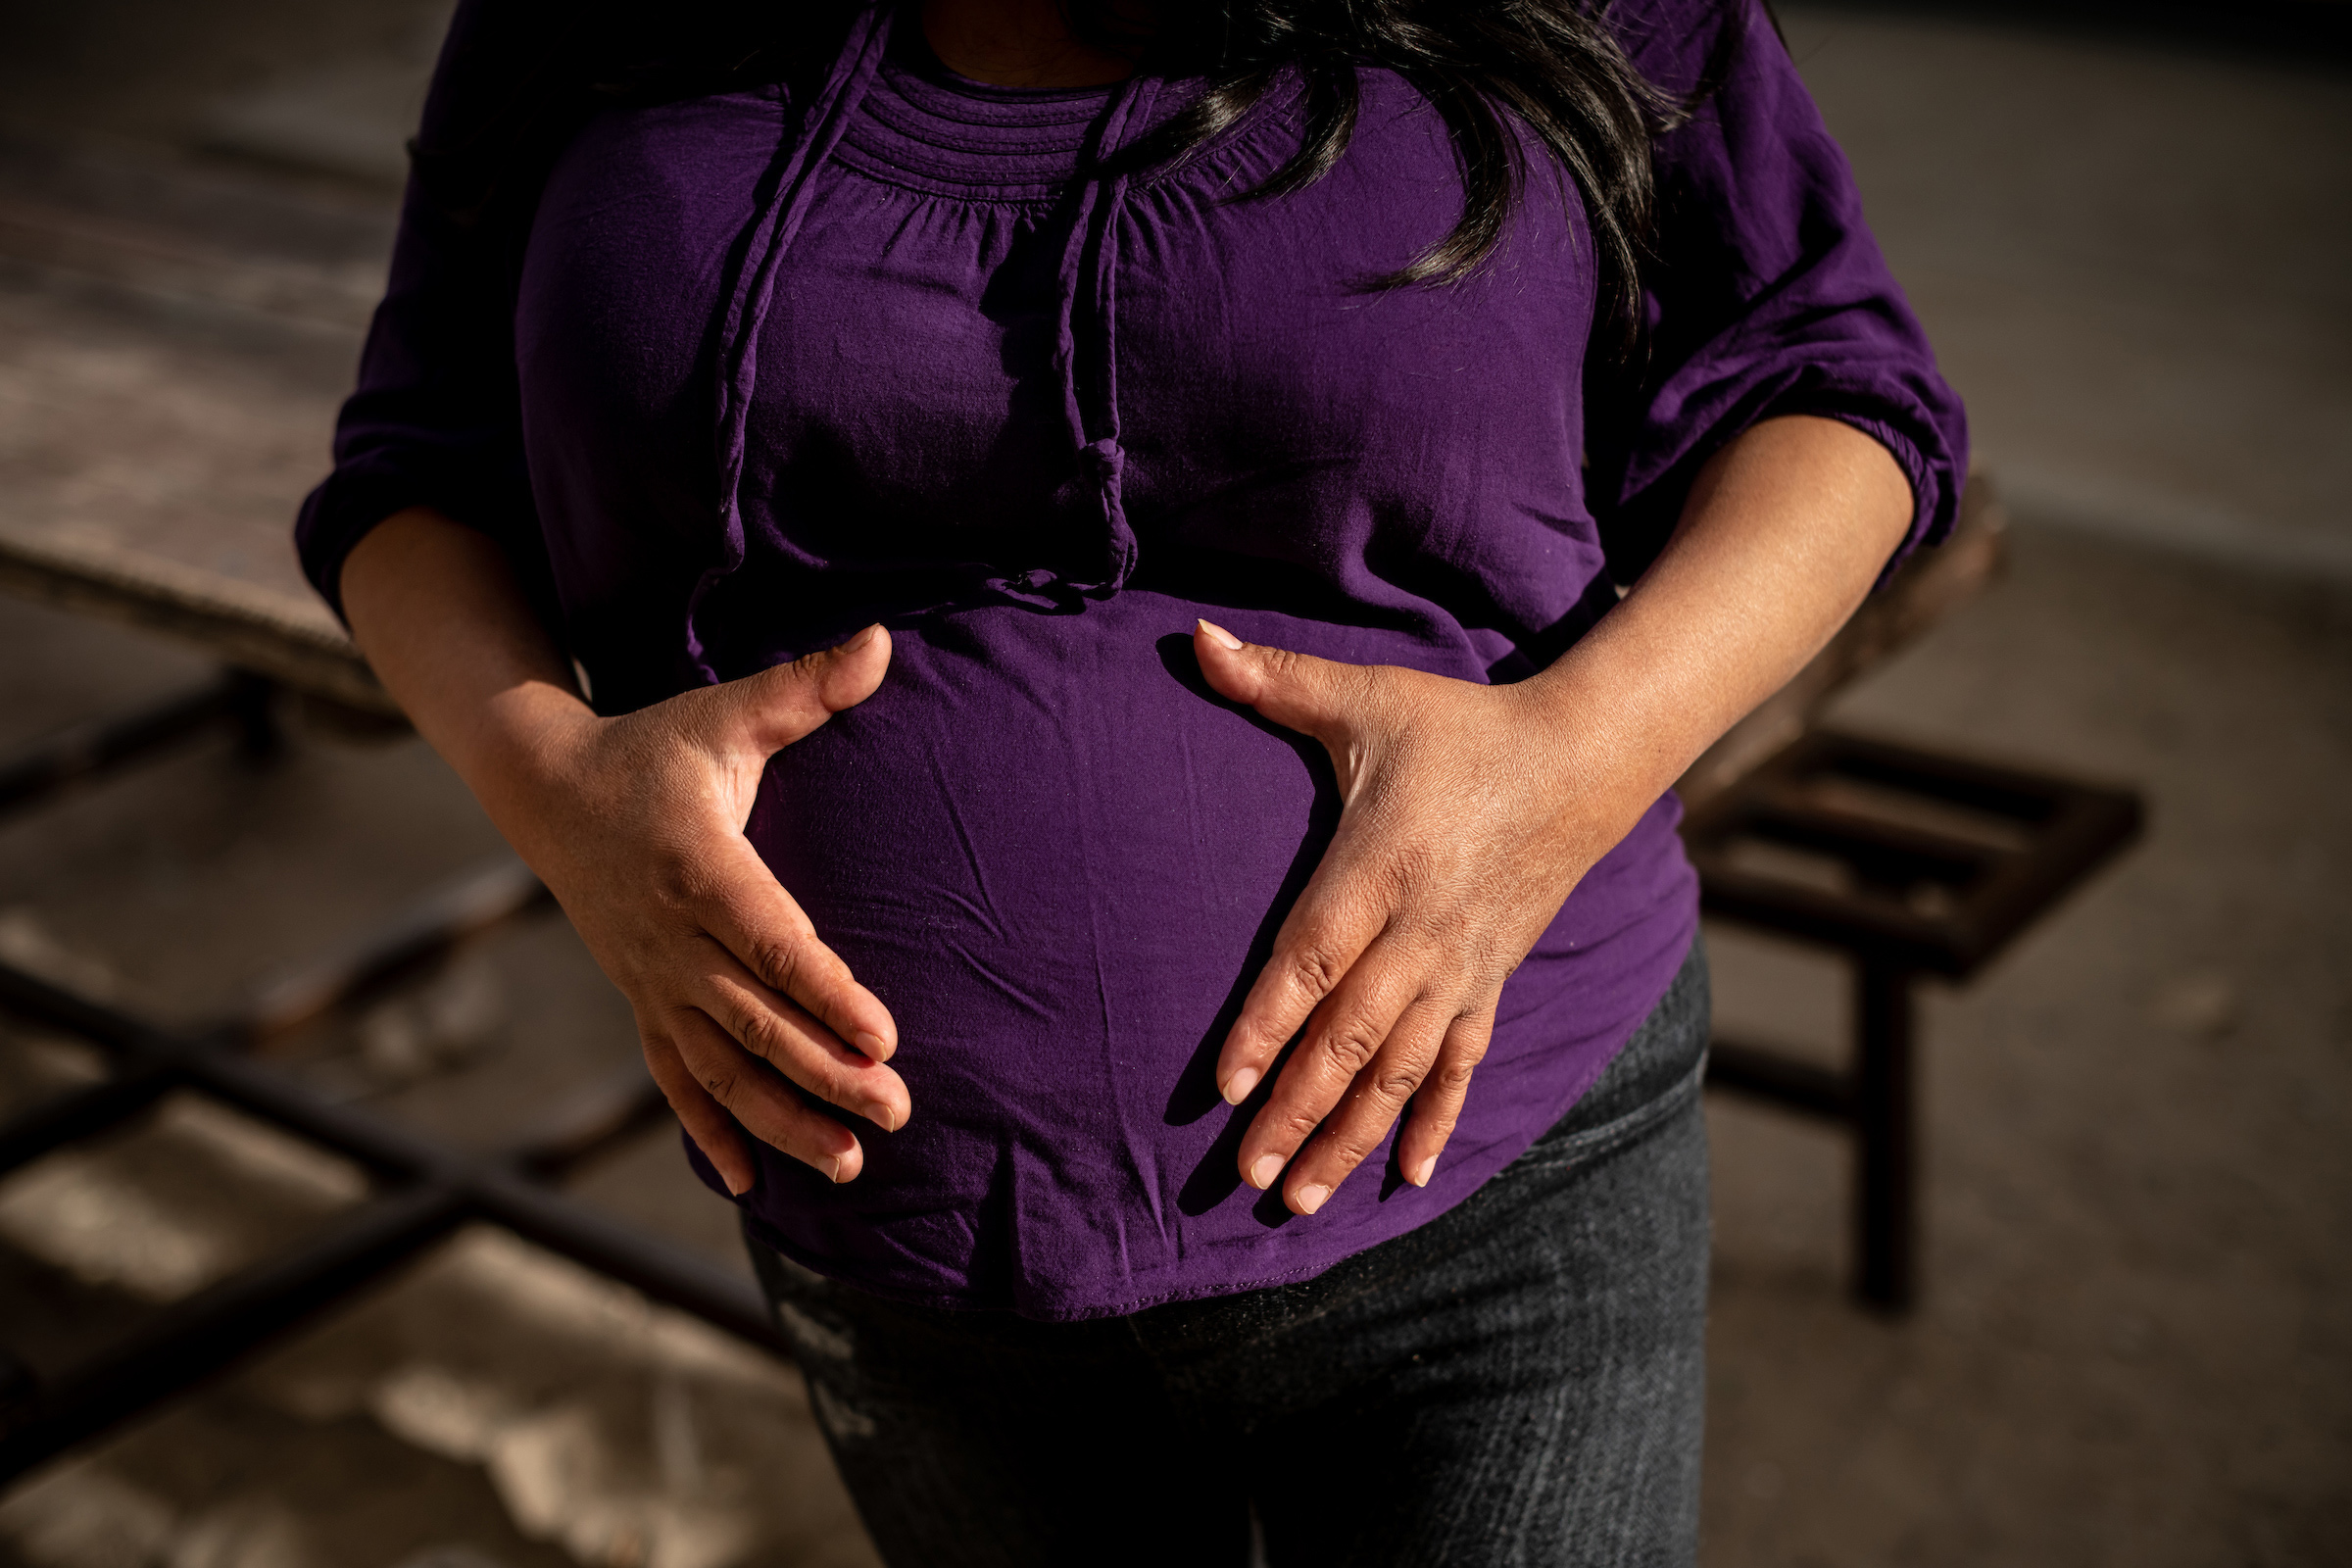 Lina, a migrant from Guatemala, poses for a portrait at 35 weeks pregnant. She is receiving support from the Las Zadas pregnancy project and is living with her daughter at the San Juan Apóstol migrant shelter. (Meridith Kohut for TIME)